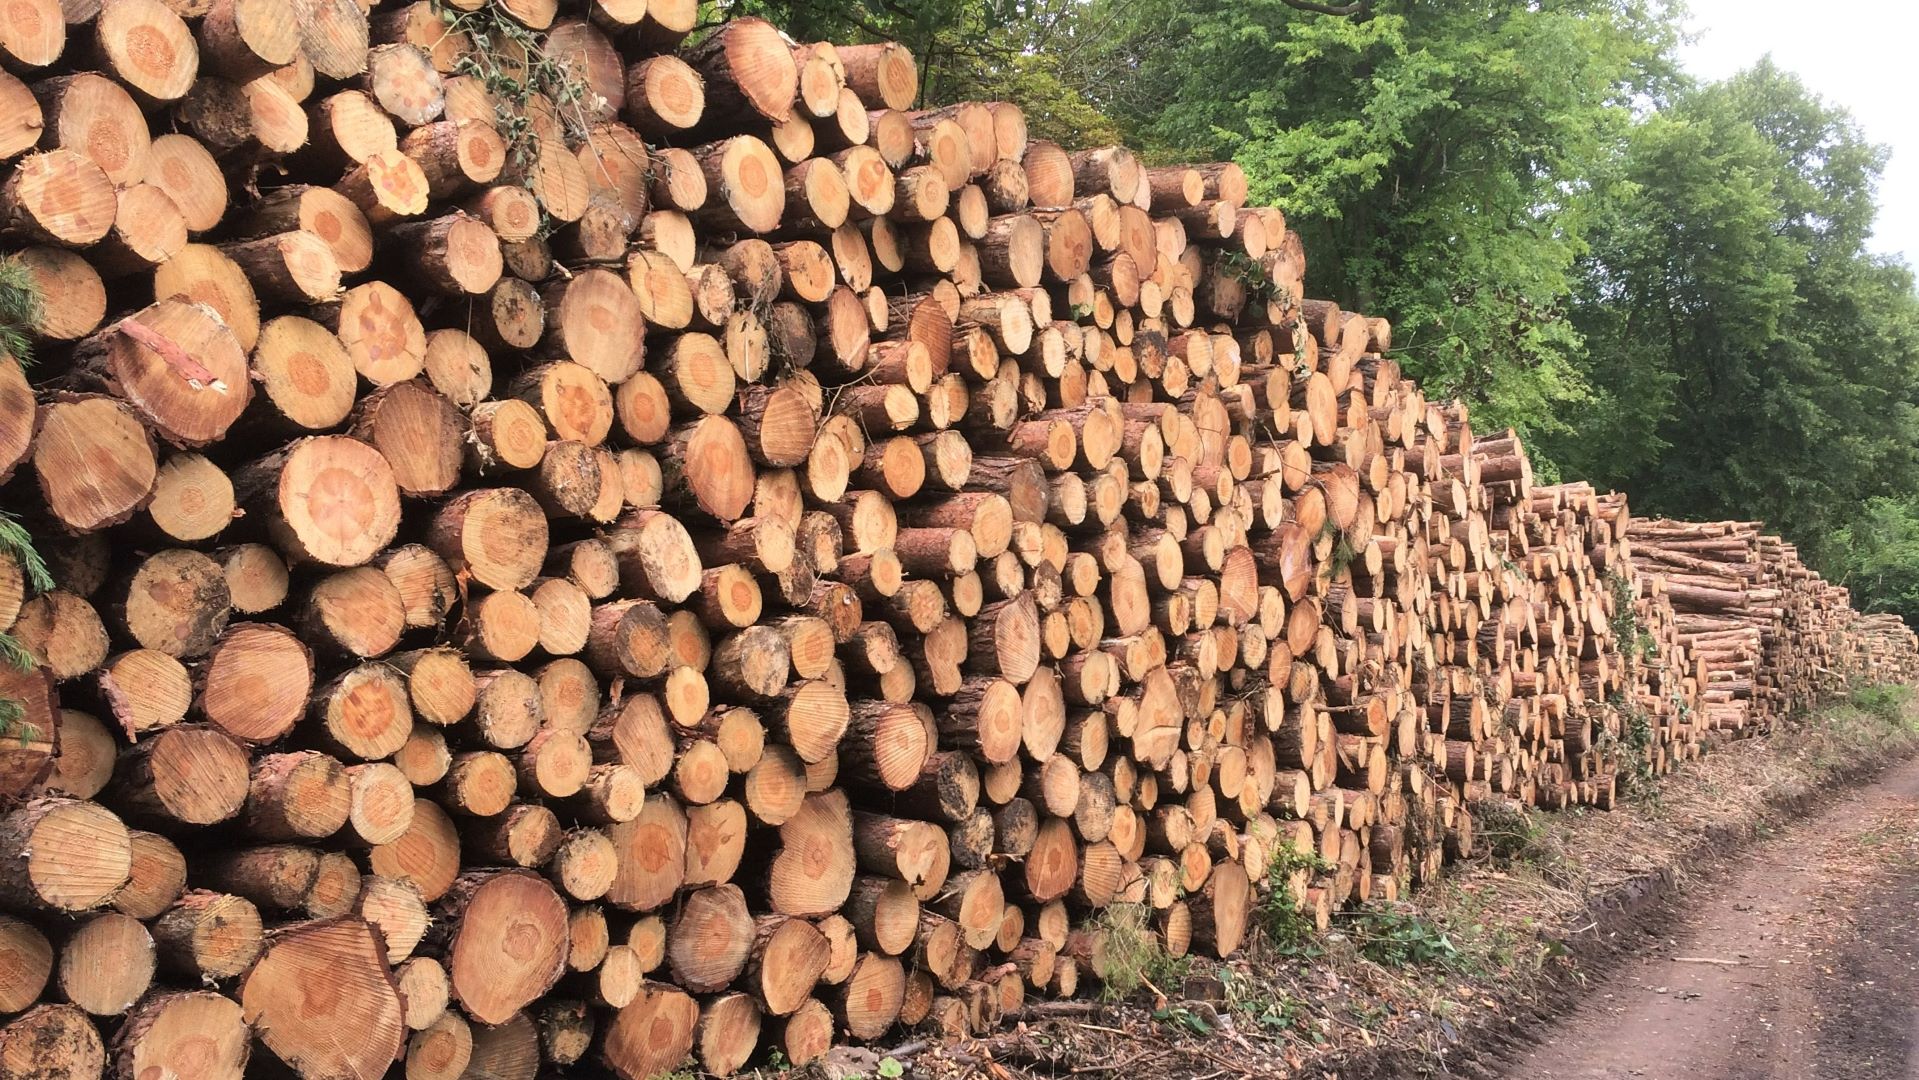 Timber Harvesting And Sales